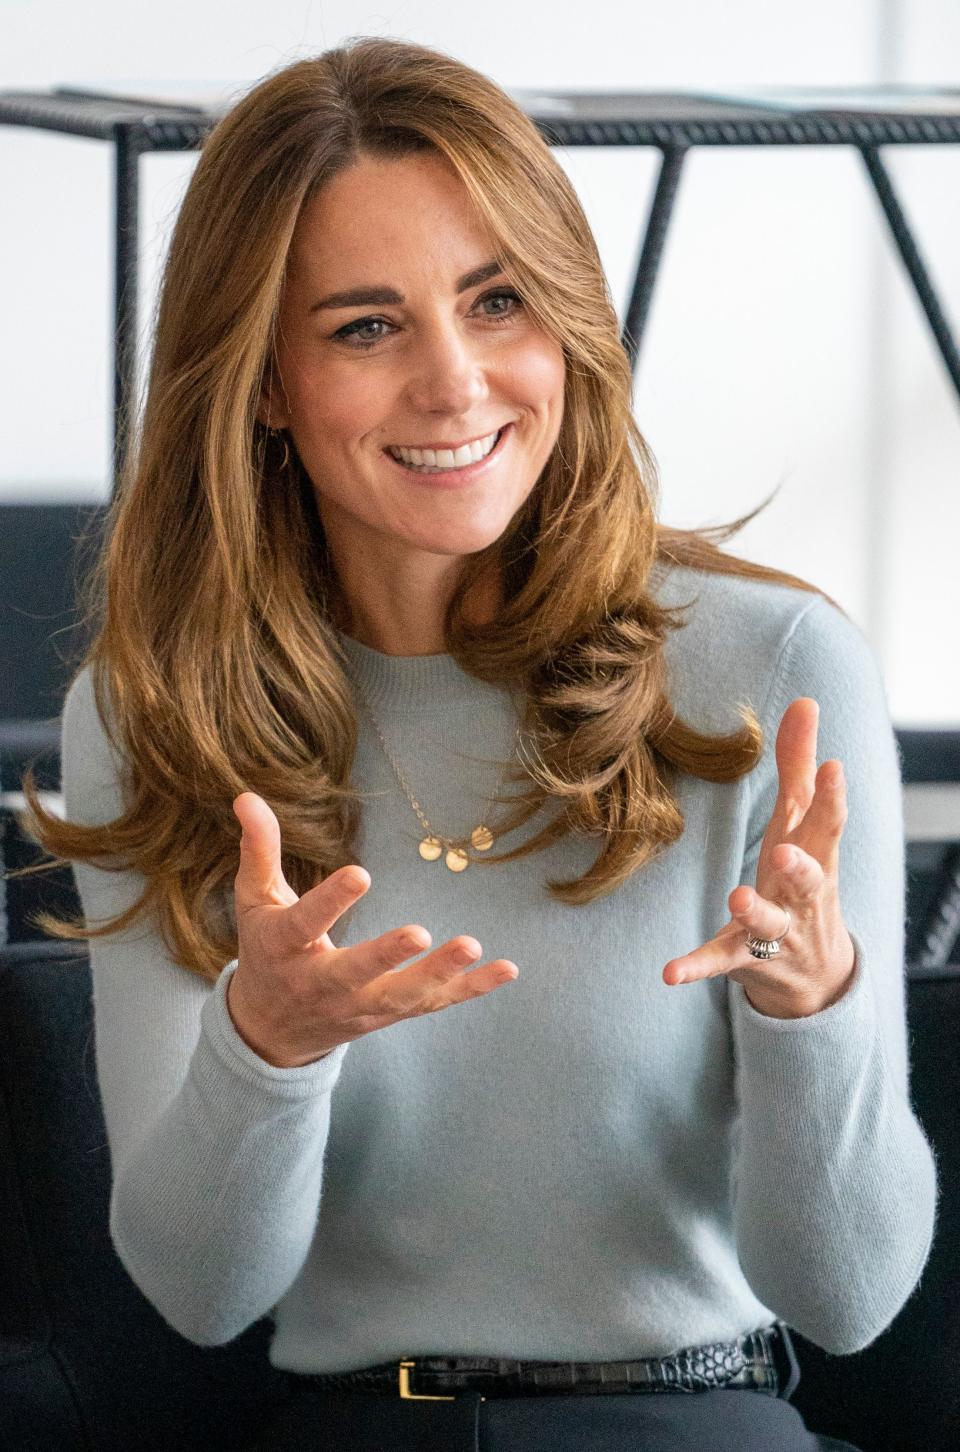 Britain's Catherine, Duchess of Cambridge reacts during her visit to the University of Derby in Derby, central England, on October 6, 2020, where she met students to hear how the coronavirus pandemic has impacted university life, and what national measures have been put in place to support student mental health. (Photo by Arthur EDWARDS / various sources / AFP) (Photo by ARTHUR EDWARDS/AFP via Getty Images)